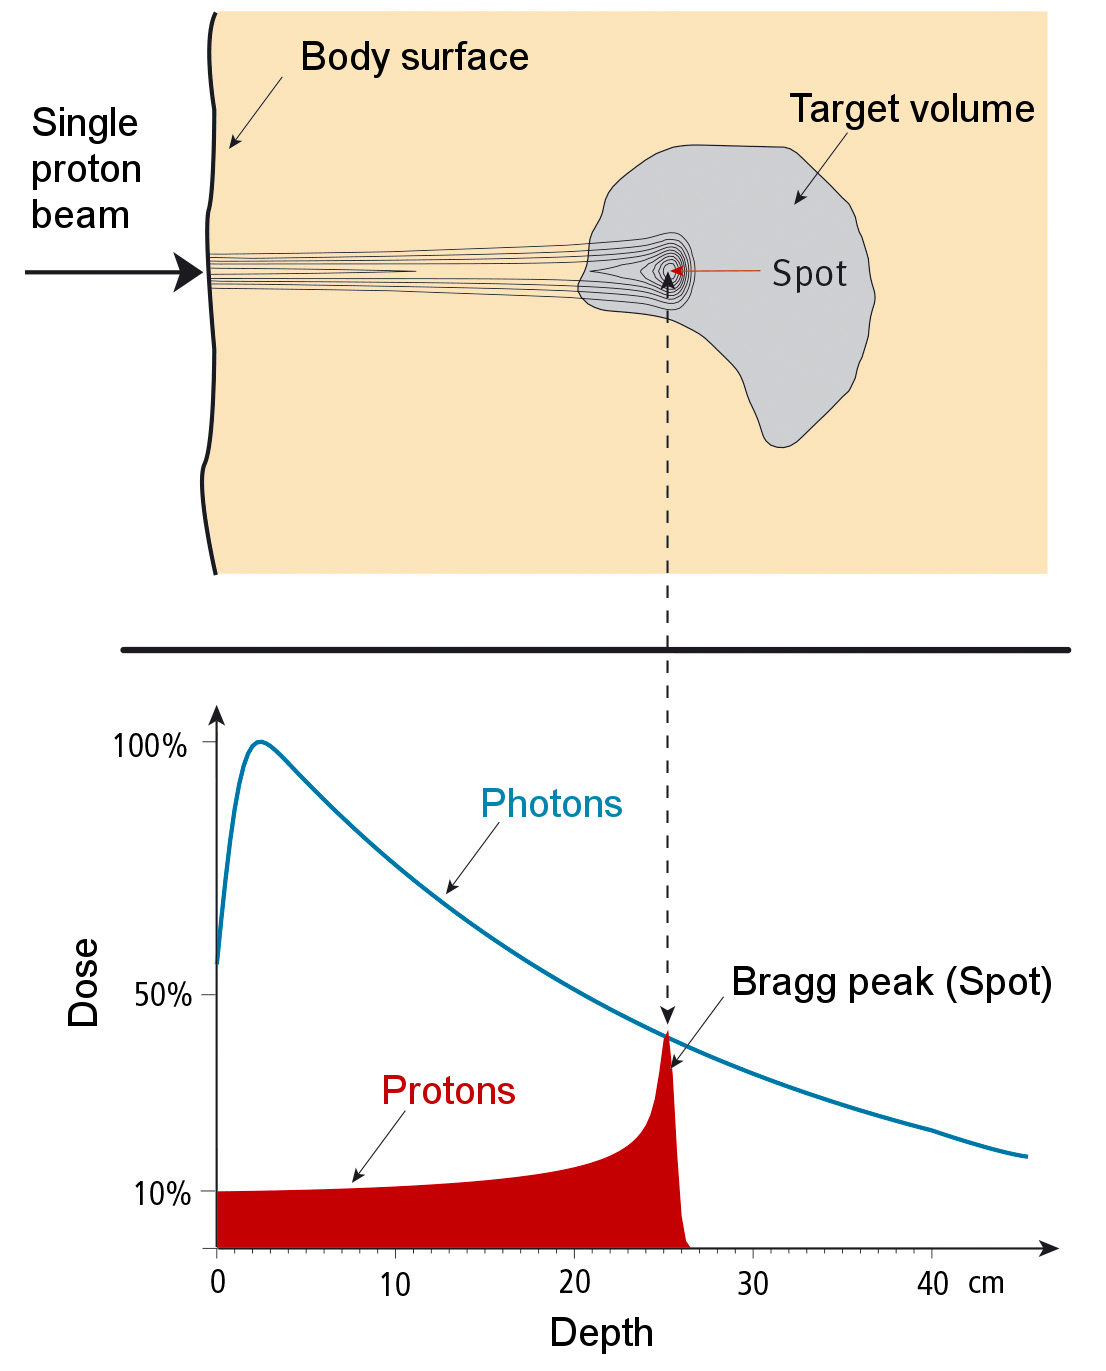 Radiation dose of a proton pencil beam as a function of depth of tissue. The range of this proton beam is 25 cm. In the top panel the dose distribution is shown. In the bottom panel the dose deposited by a proton beam in comparison with that of a photon beam is shown.